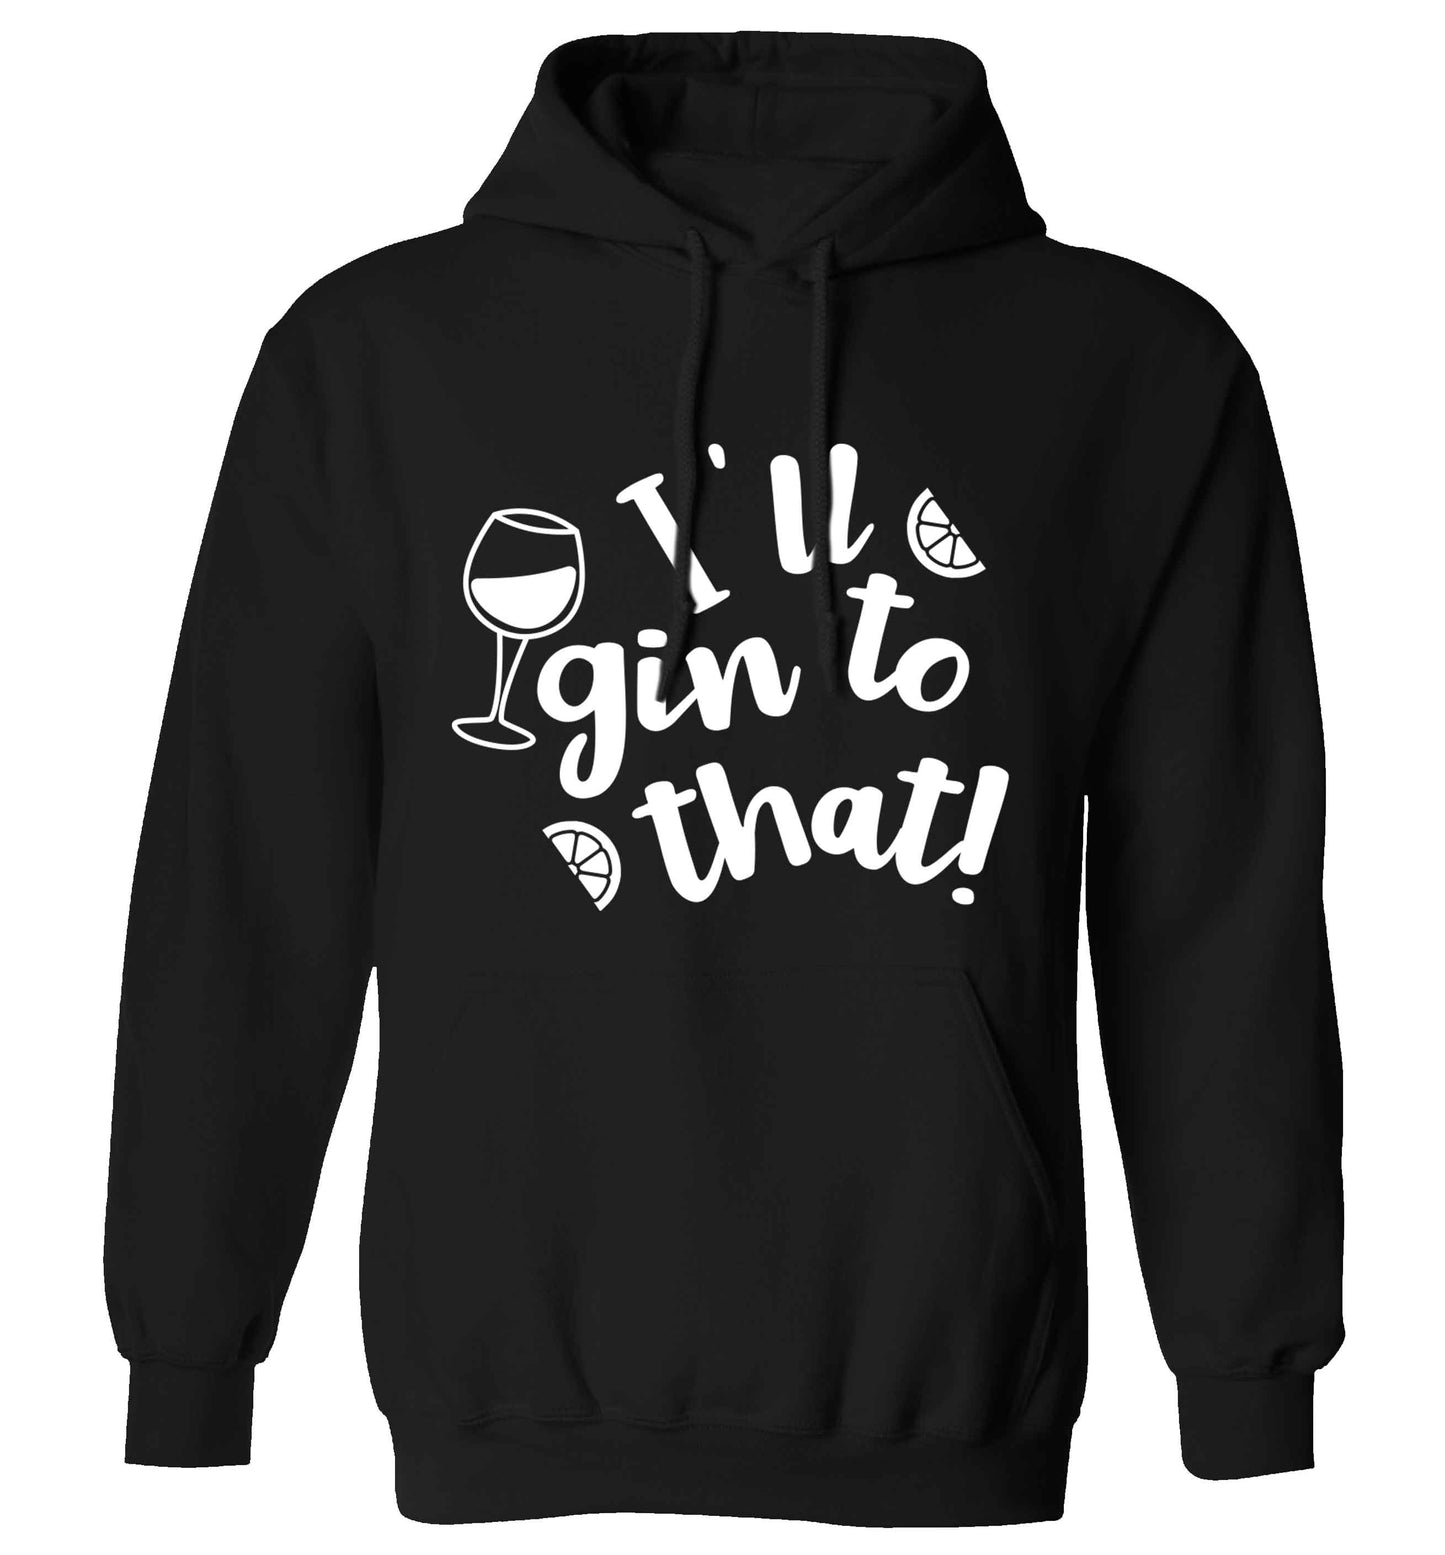 I'll gin to that! adults unisex black hoodie 2XL